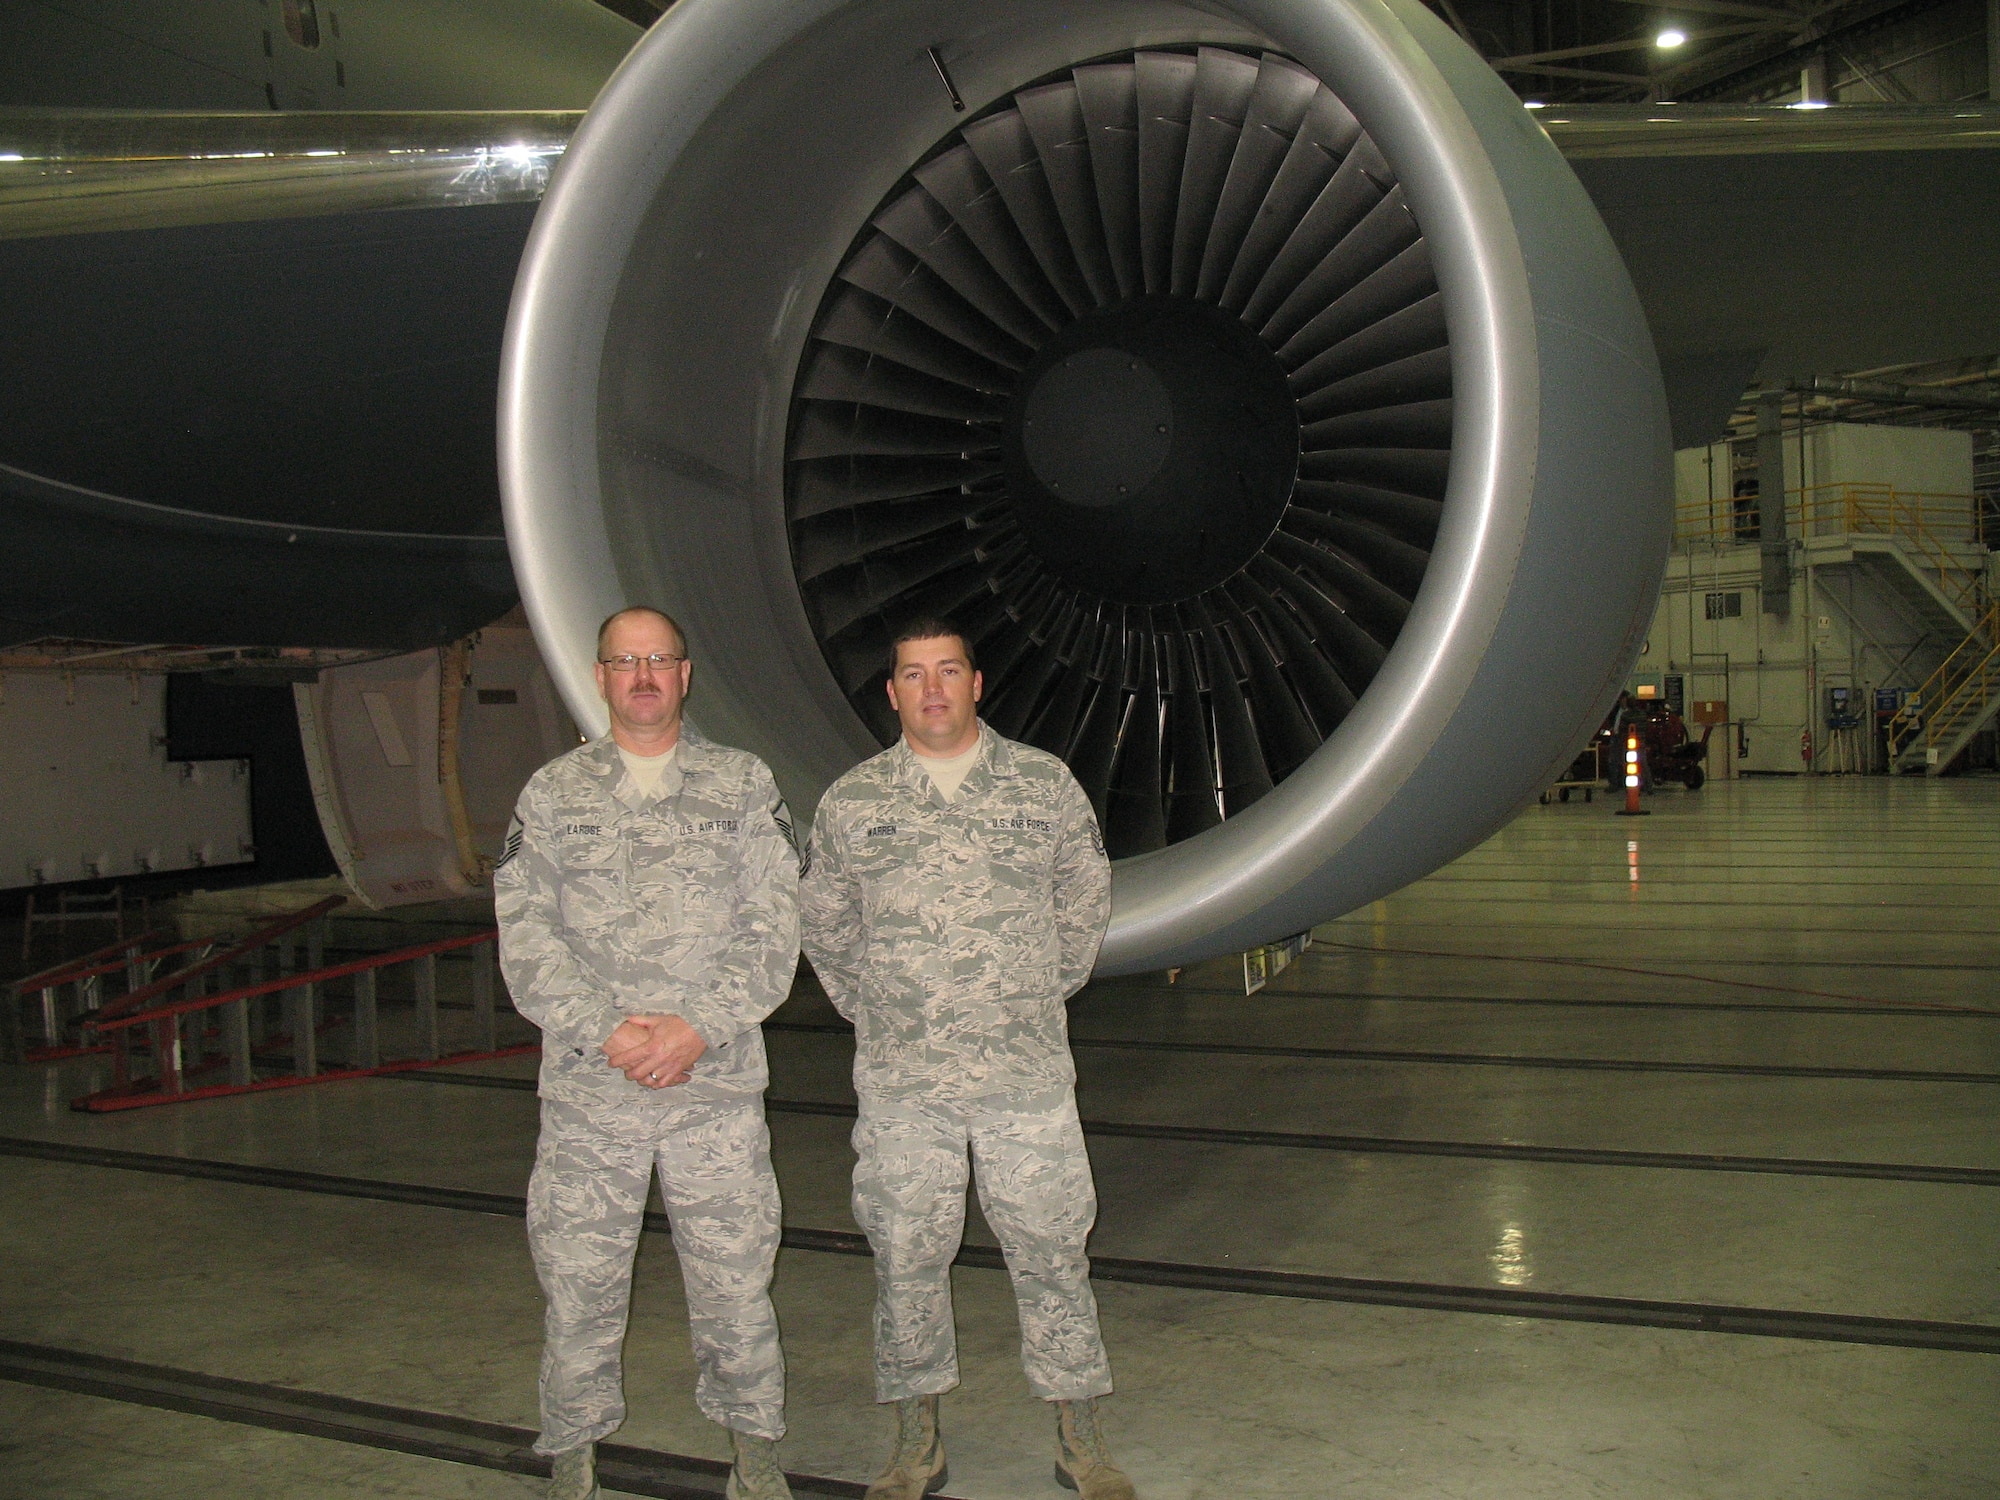 U.S. Air Force Master Sgt. Joel D. LaRose (left) and Tech. Sgt. Steven M. Warren pose for a photo in front of a KC-46 aircraft engine at Boeing near Seattle, Sept. 28, 2015. The Airman are part of the Air Force’s Tech Order Certification and Verification Team, for the KC-46 Pegasus. LaRose and Warren are assigned to the 157th Maintenance Group, Pease Air National Guard Base, New Hampshire.  (Courtesy photo, Boeing) 
